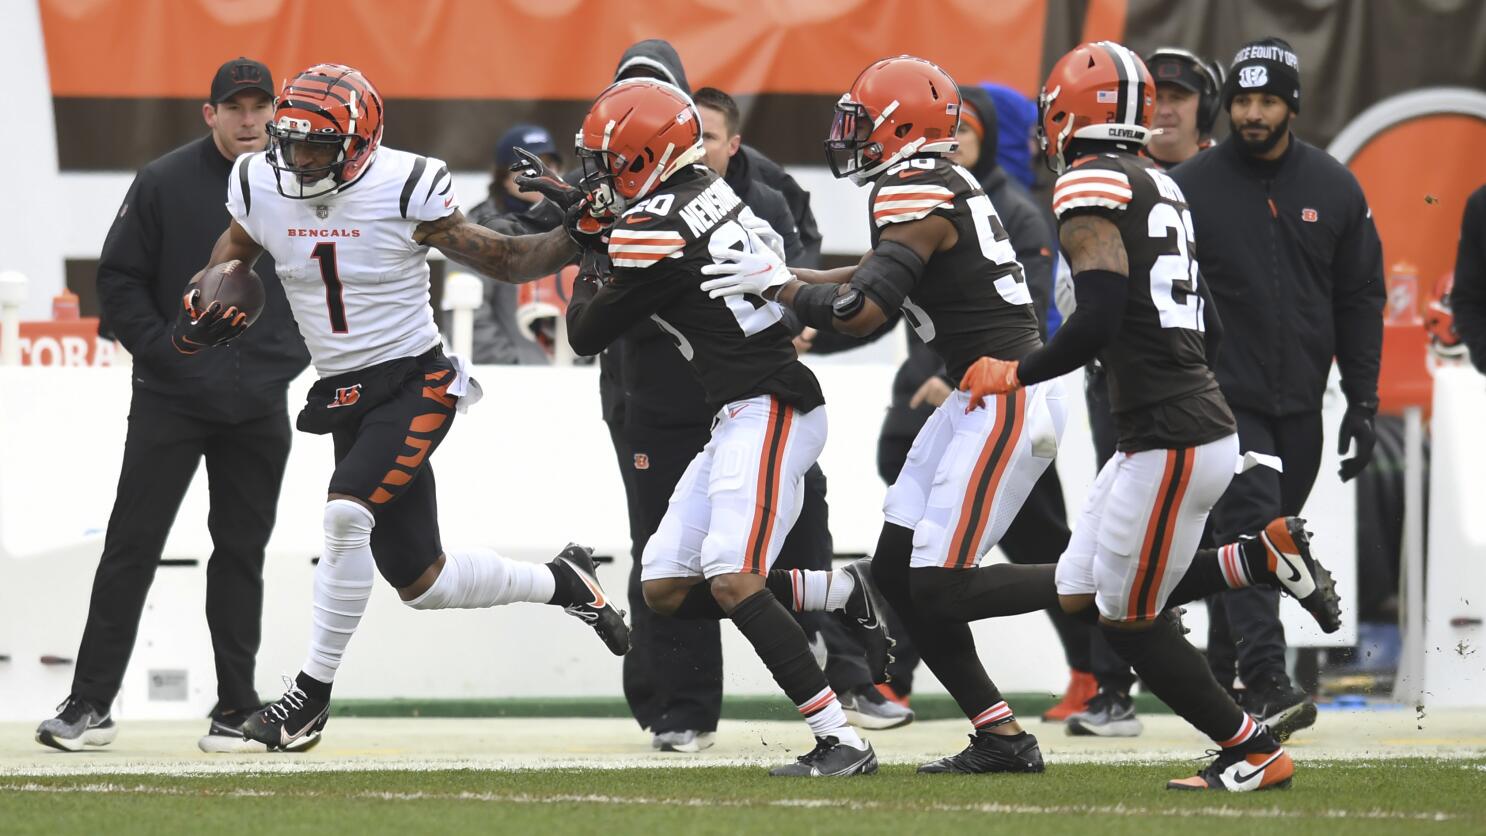 After regulars rest, playoff-bound Bengals prep for Raiders - The